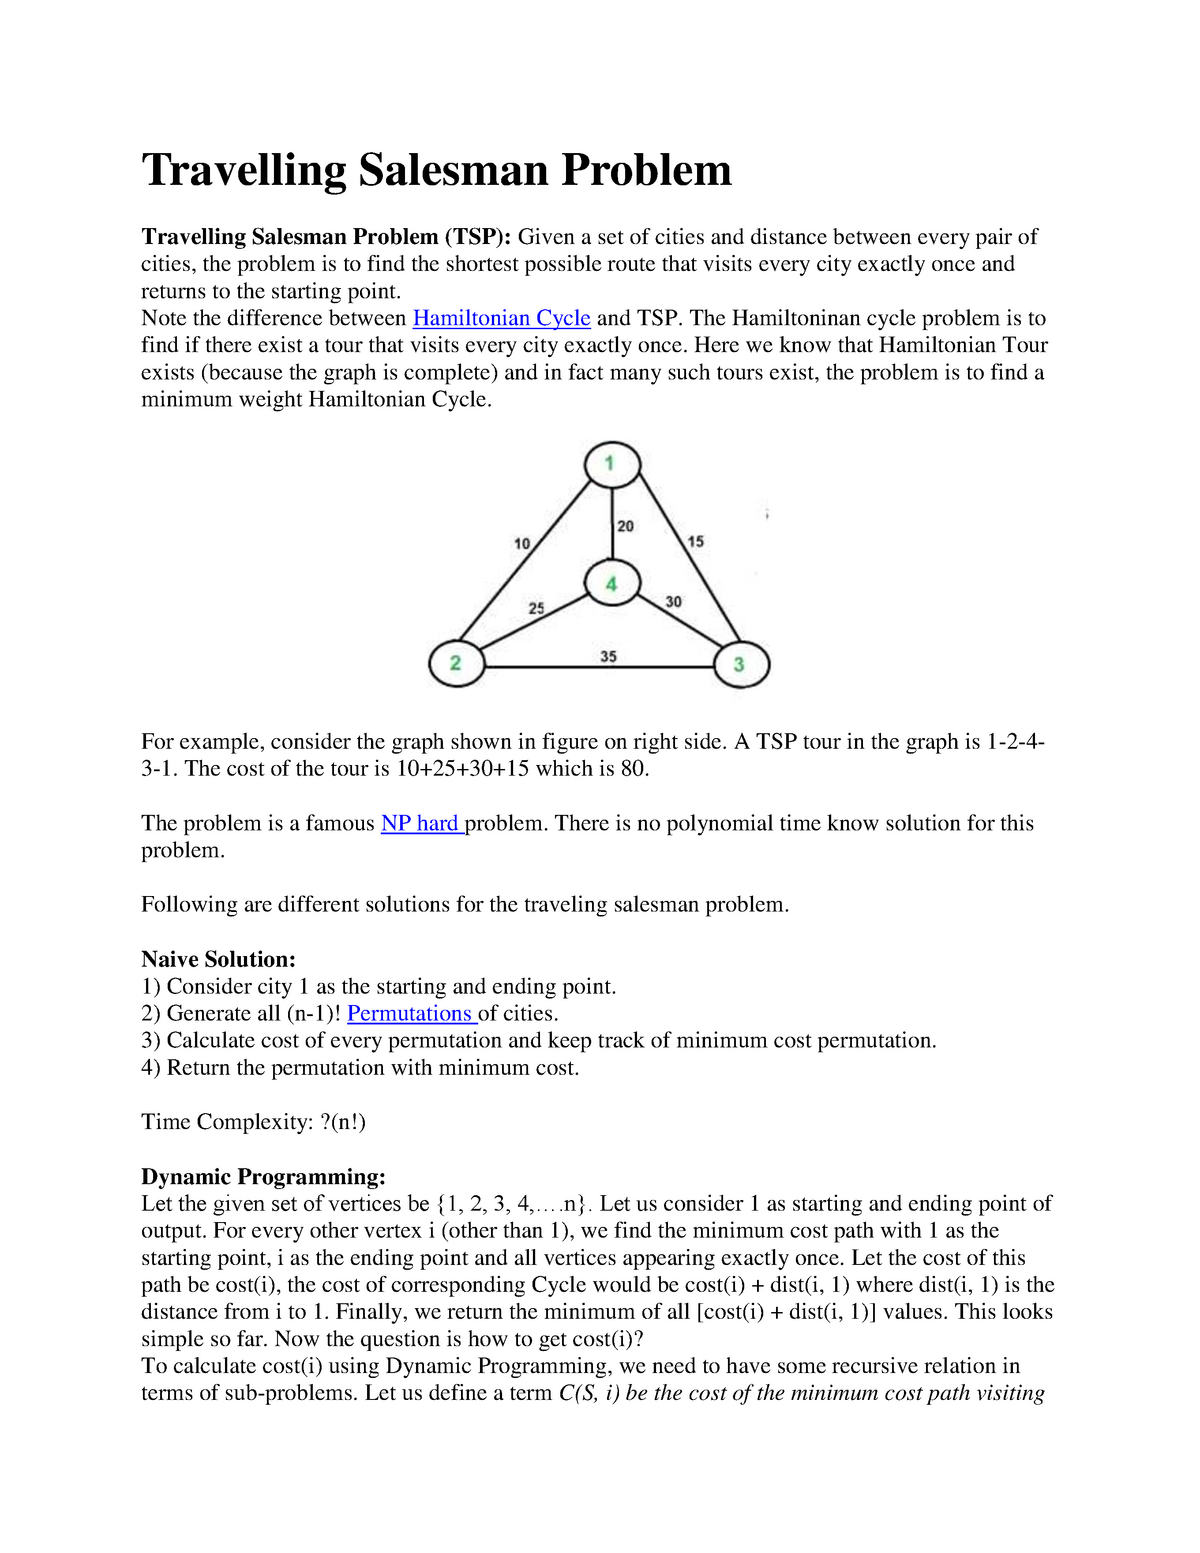 traveling salesman problem example with solution